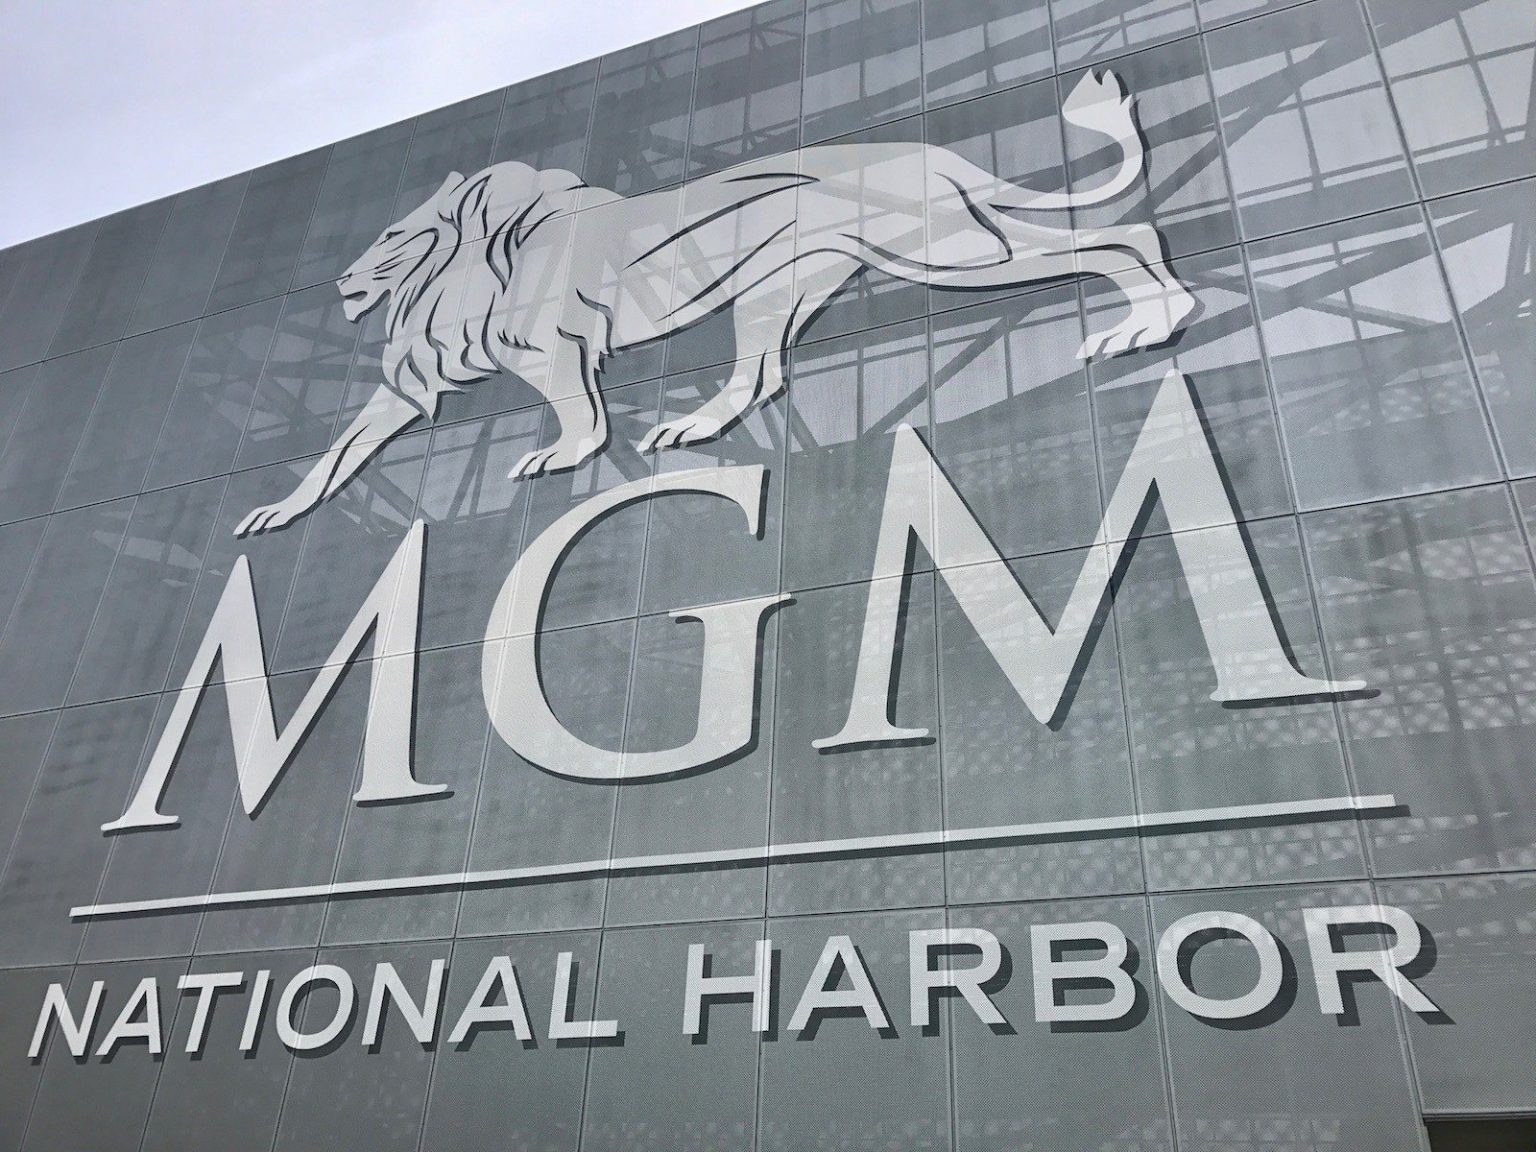 who owns mgm casino in maryland